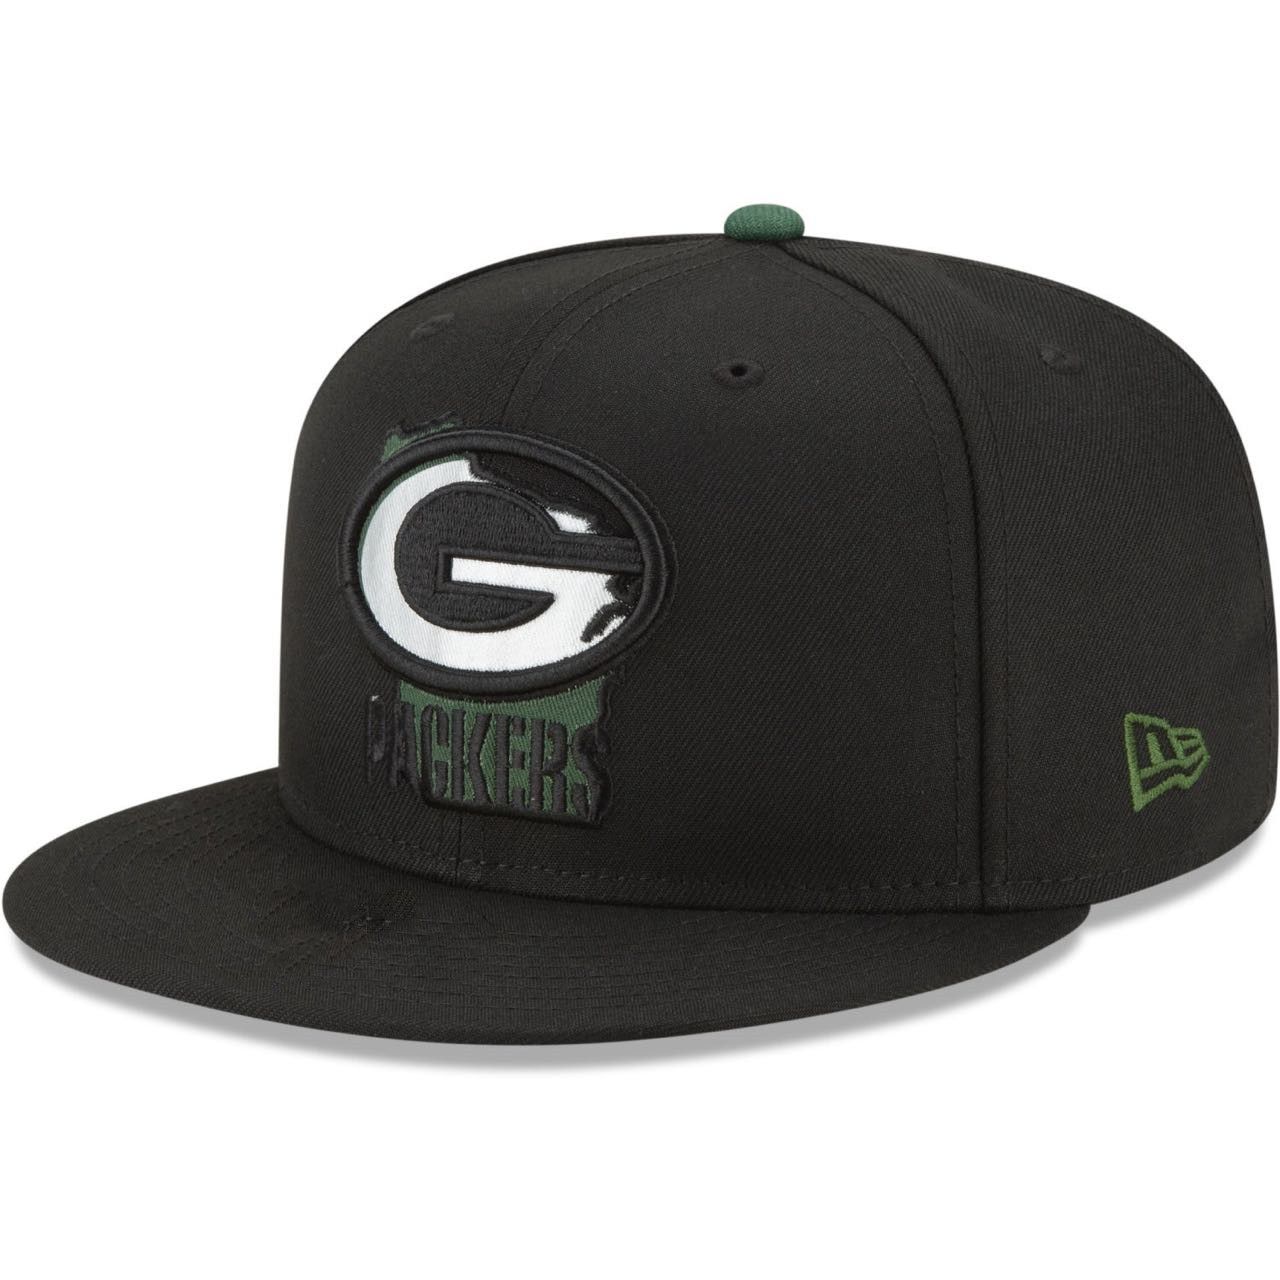 2023 NFL Green Bay Packers Hat TX 20230821->nfl hats->Sports Caps